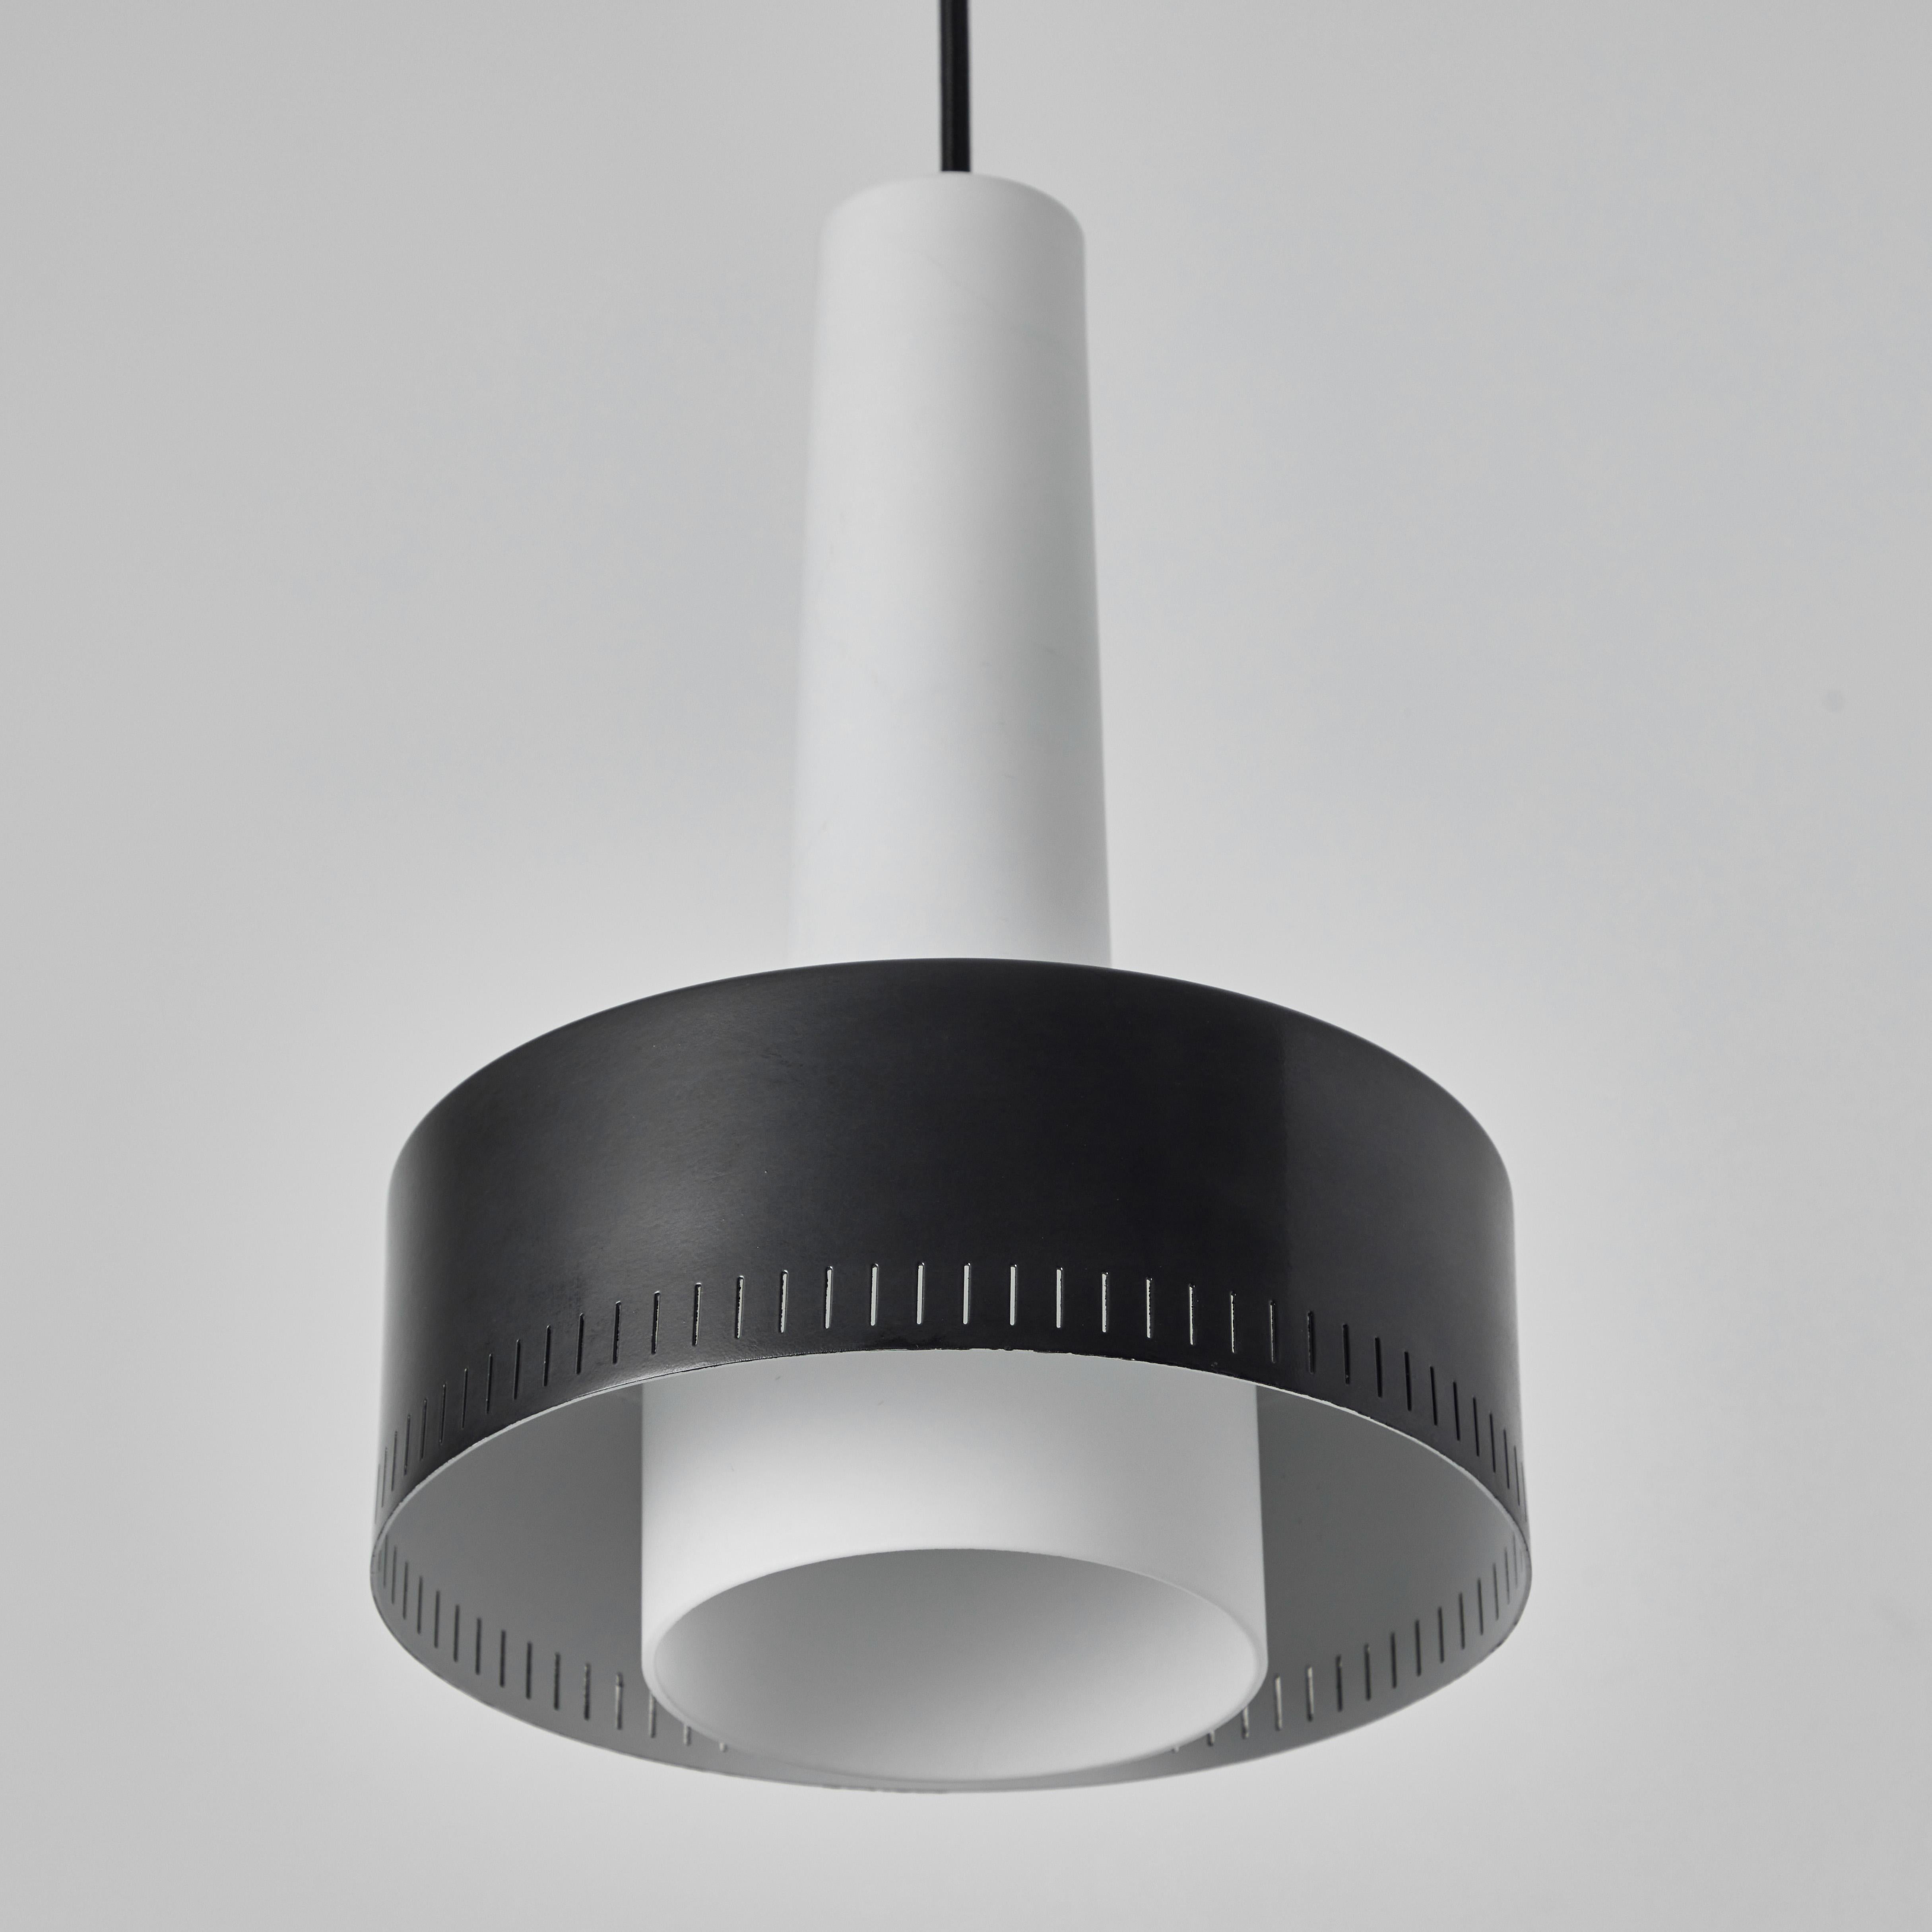 Mid-20th Century 1950s Glass & Perforated Metal Pendant Attributed to Bruno Gatta for Stilnovo